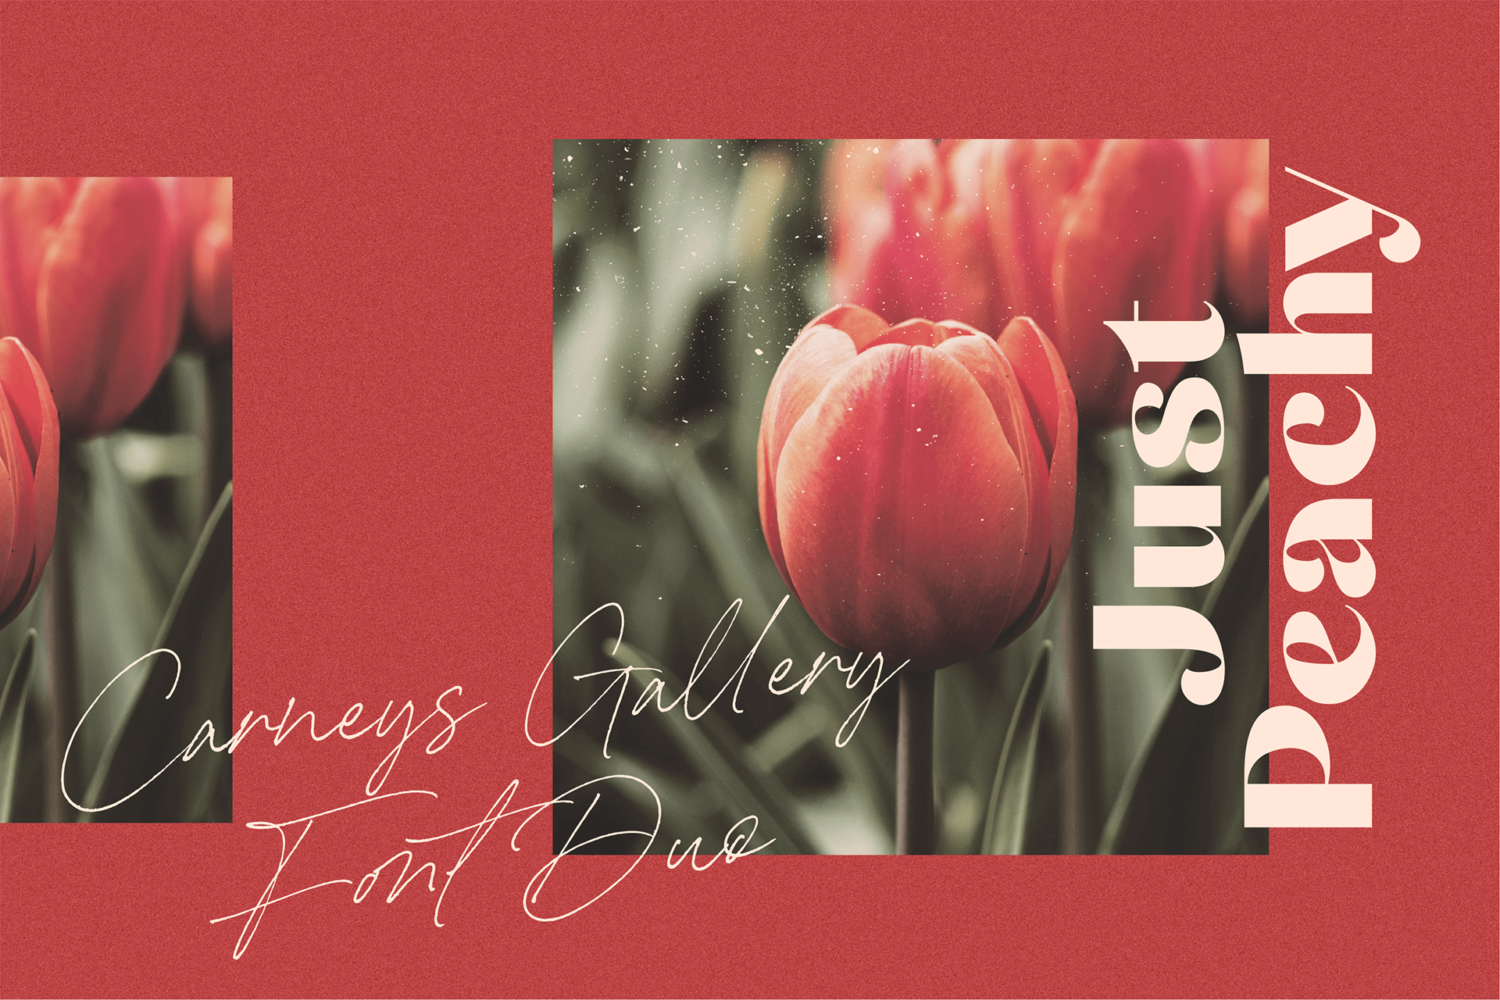 Free Carneys Gallery Font Duo